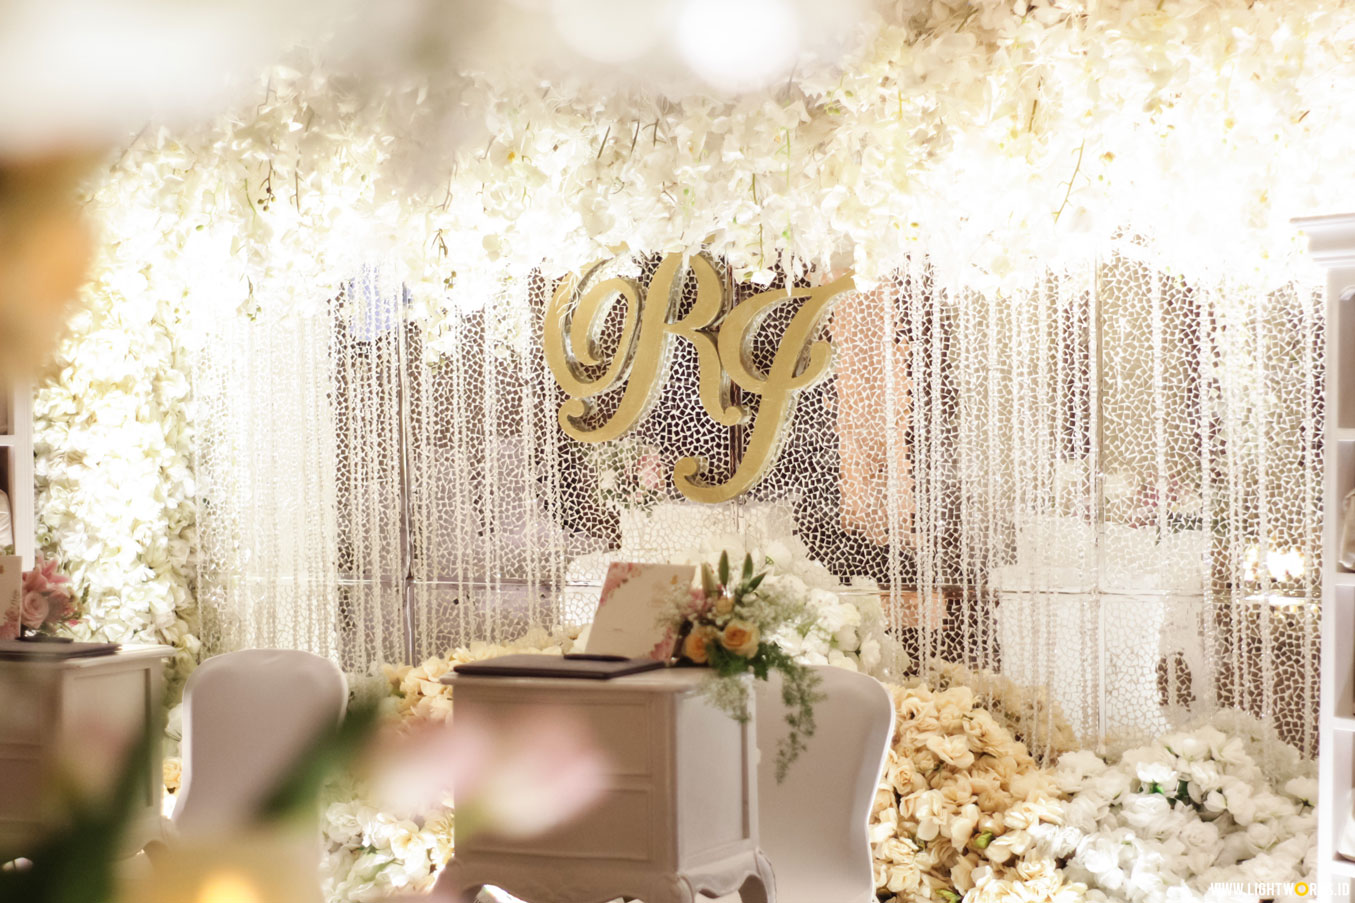 Rico and Jessica’s wedding reception | Venue at Mandarin Oriental Jakarta | Decoration by Eikona Design | Organised by Grace WO | Cake by White Pot Wedding Cakes | Lighting by Lightworks 